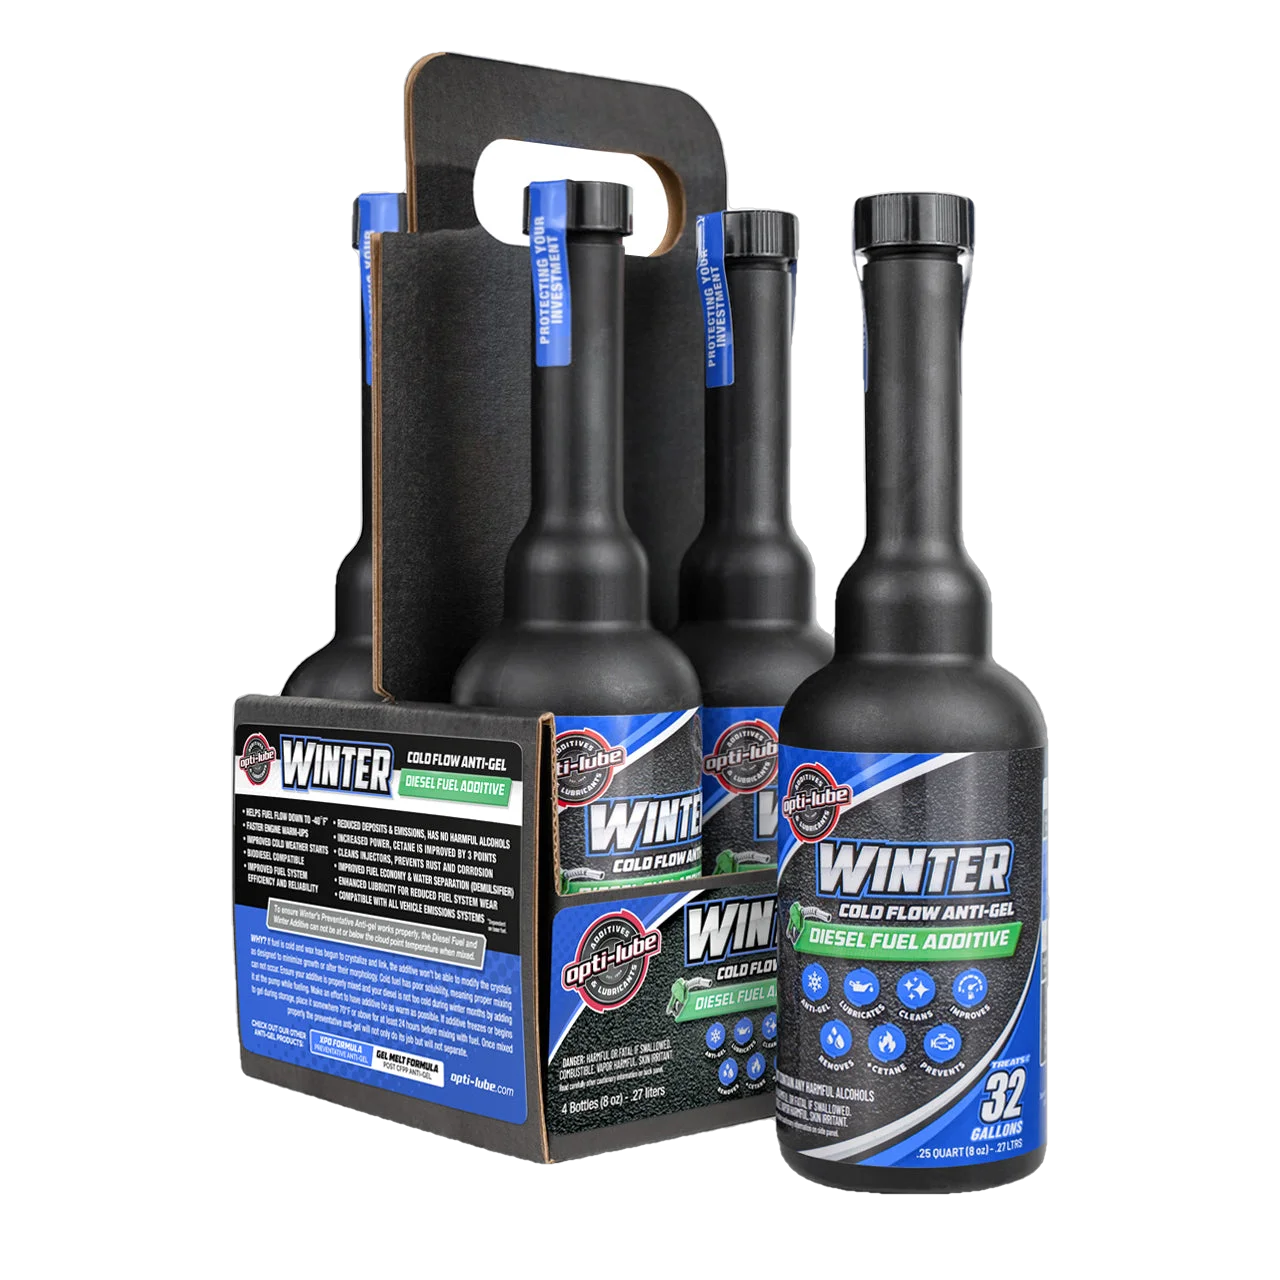 Opti-Lube Winter Anti-gel Diesel Fuel Additive: 4oz 8 Pack, Treats up to 16  Gallons per 4 oz Bottle